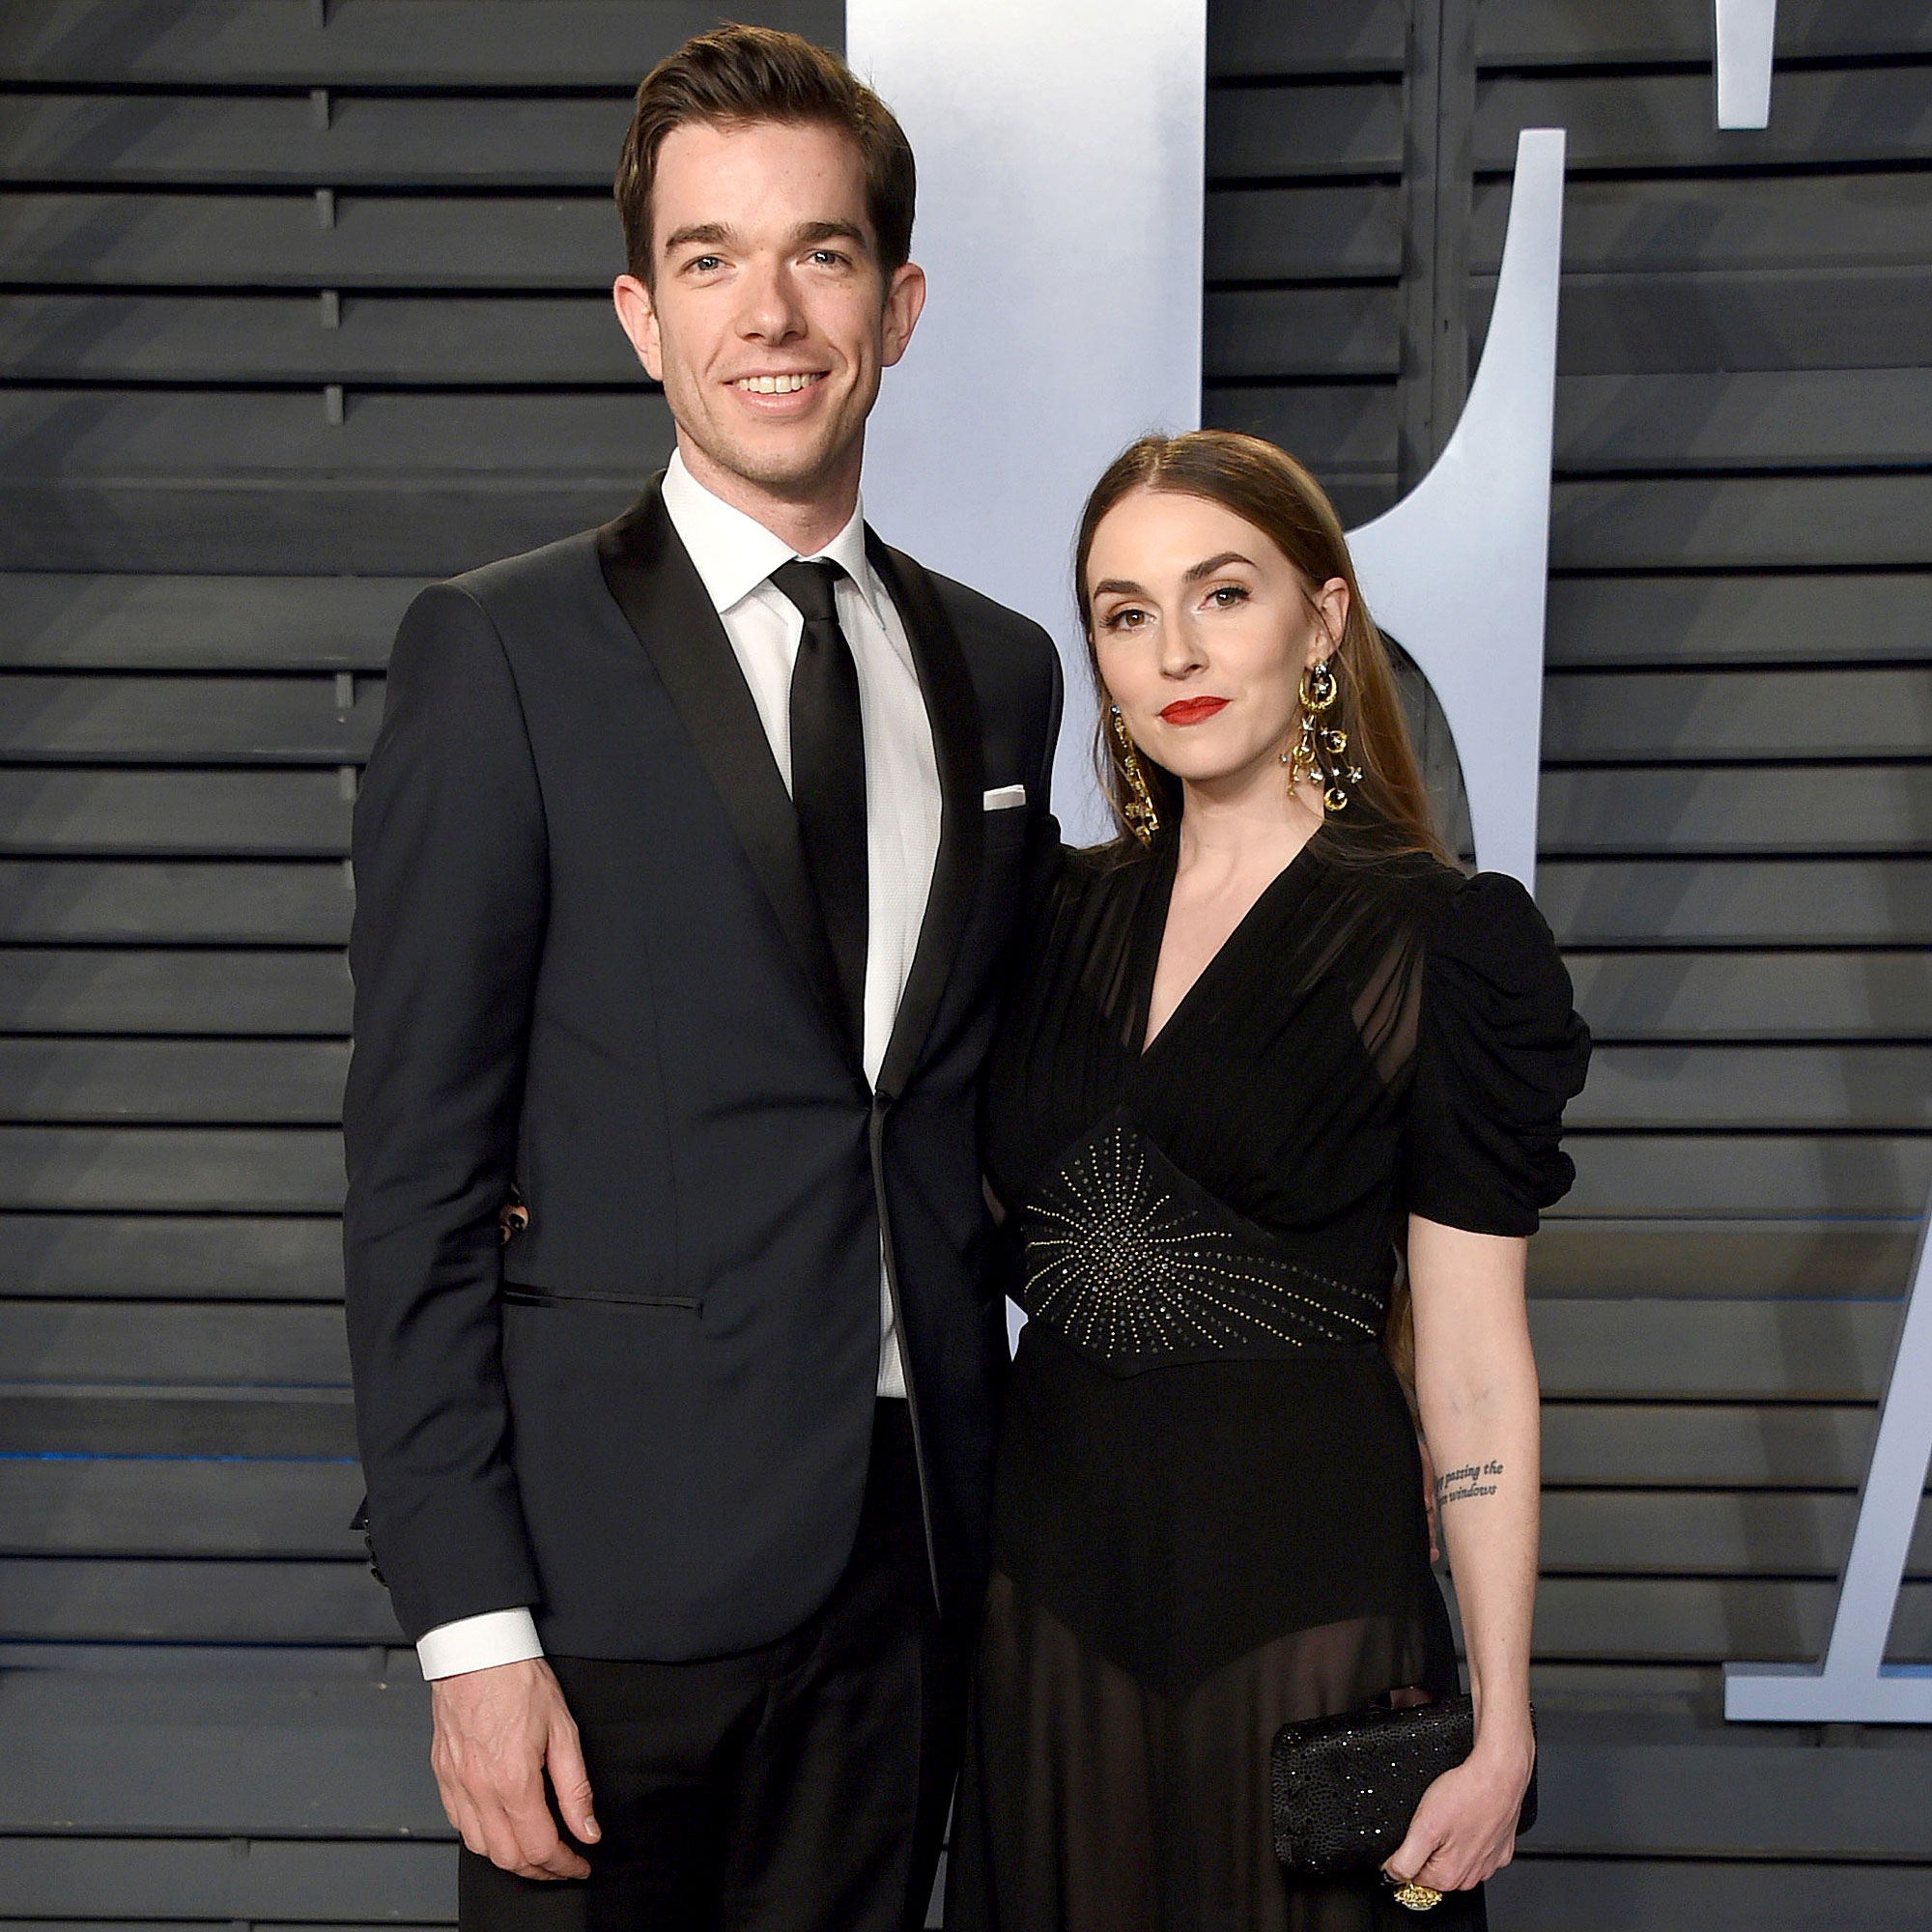 Anna Marie Tendler 5 Things to Know After John Mulaney Split pic